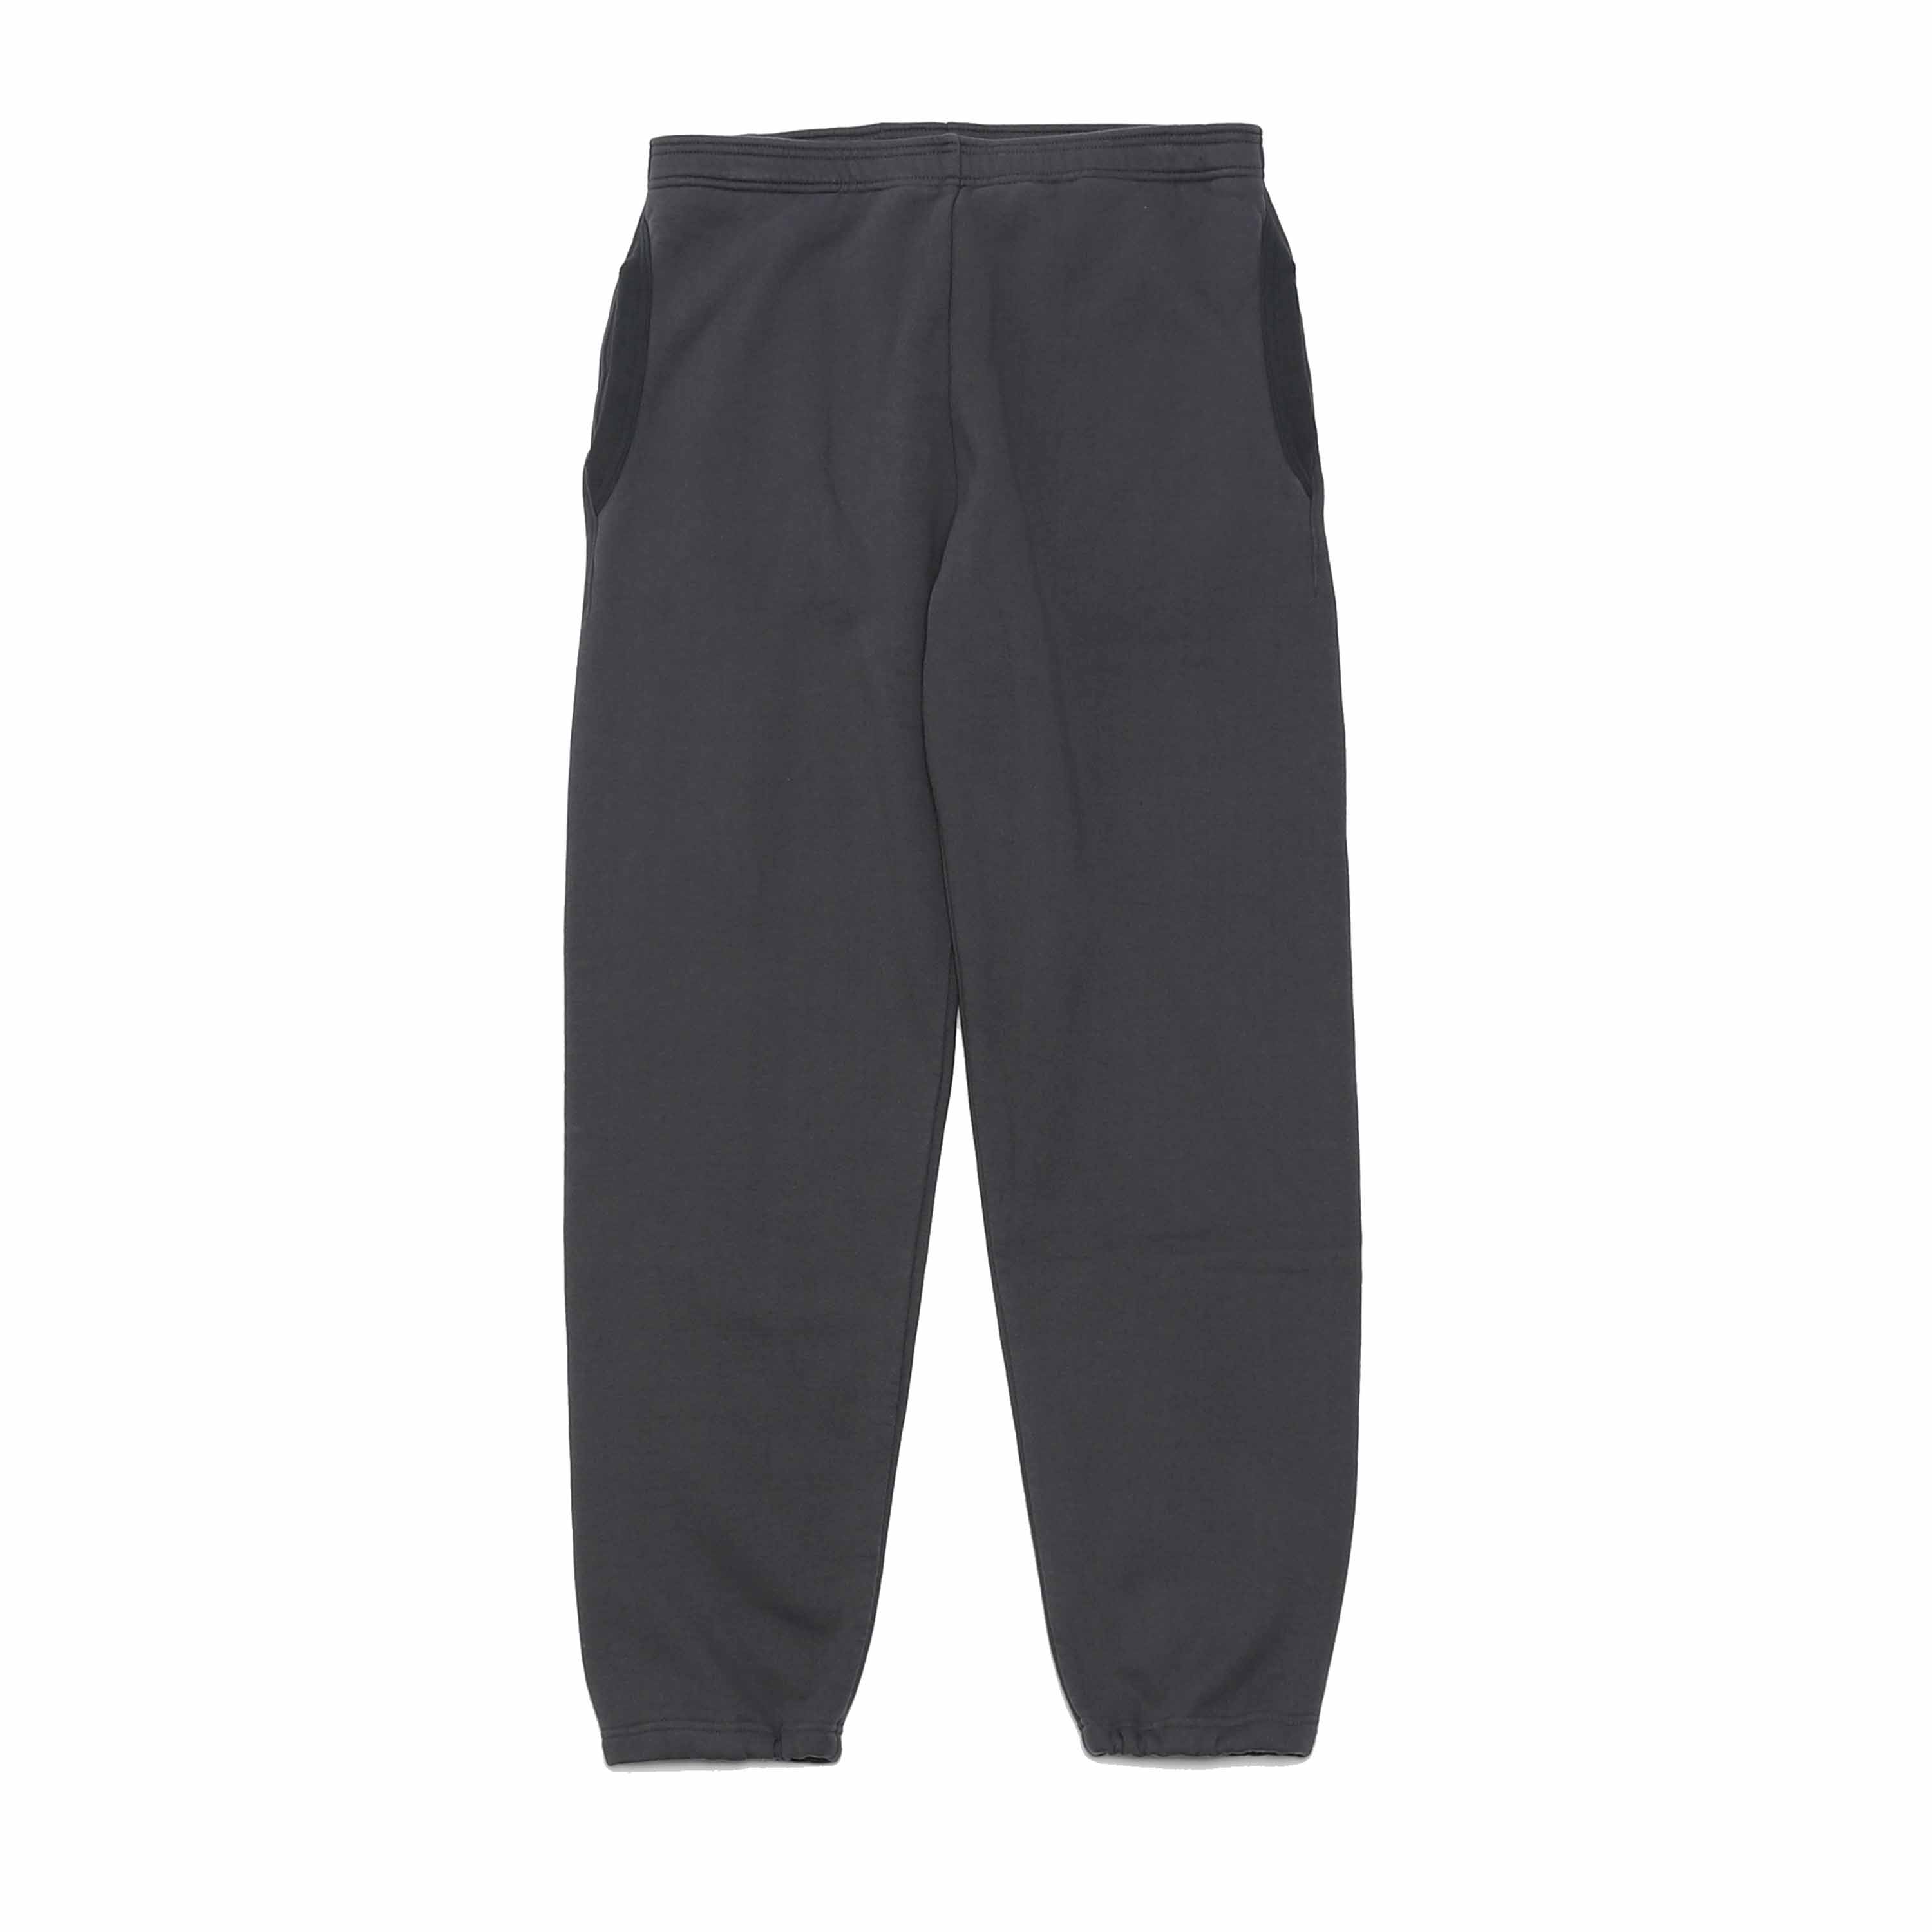 WIDE TAPERED PANTS - BLACK